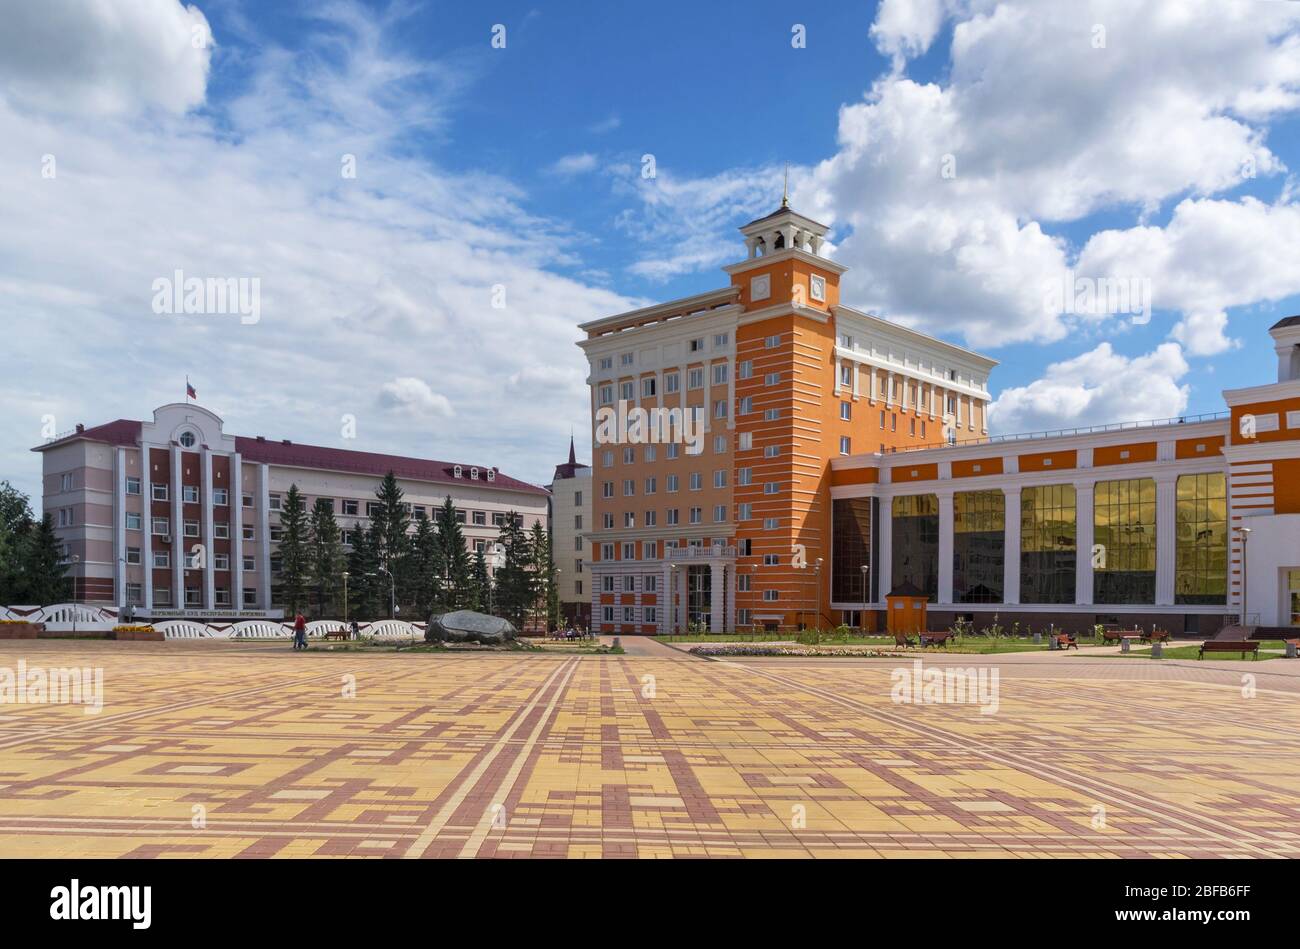 The Supreme court building in the distance on a beautiful square, in Mordovia, Saransk July 18, 2013 Stock Photo